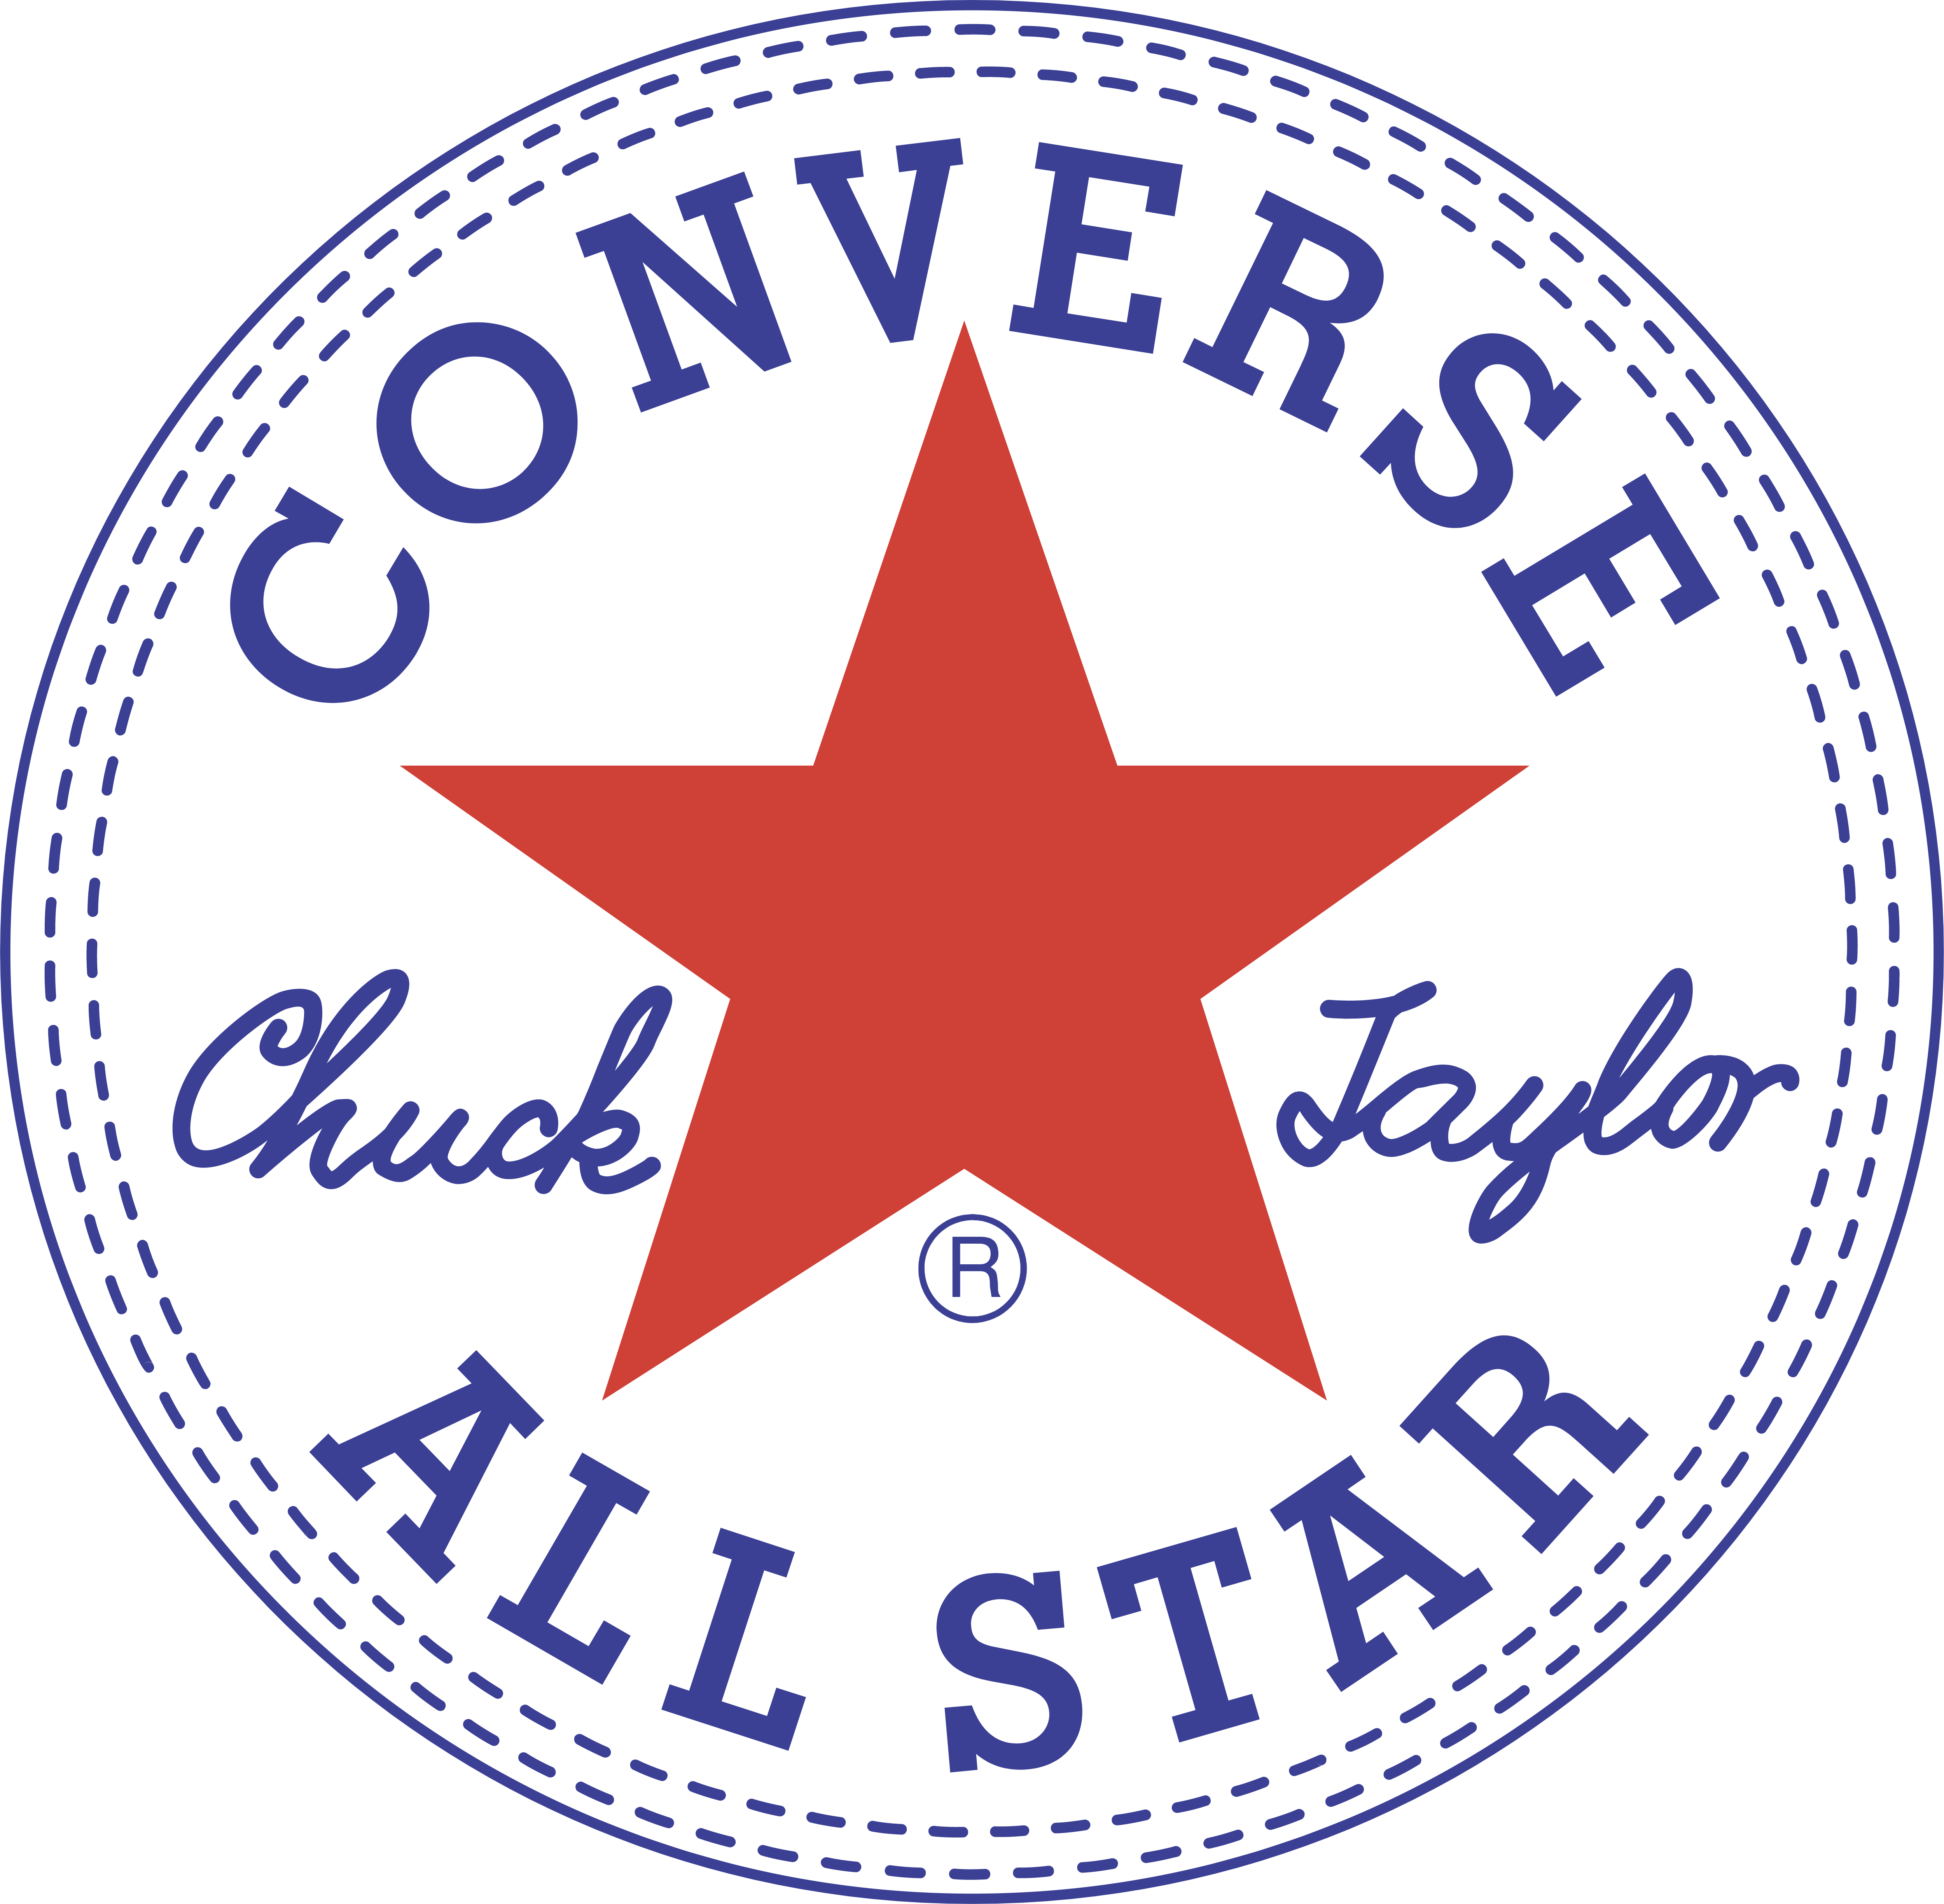 converse all star logo png